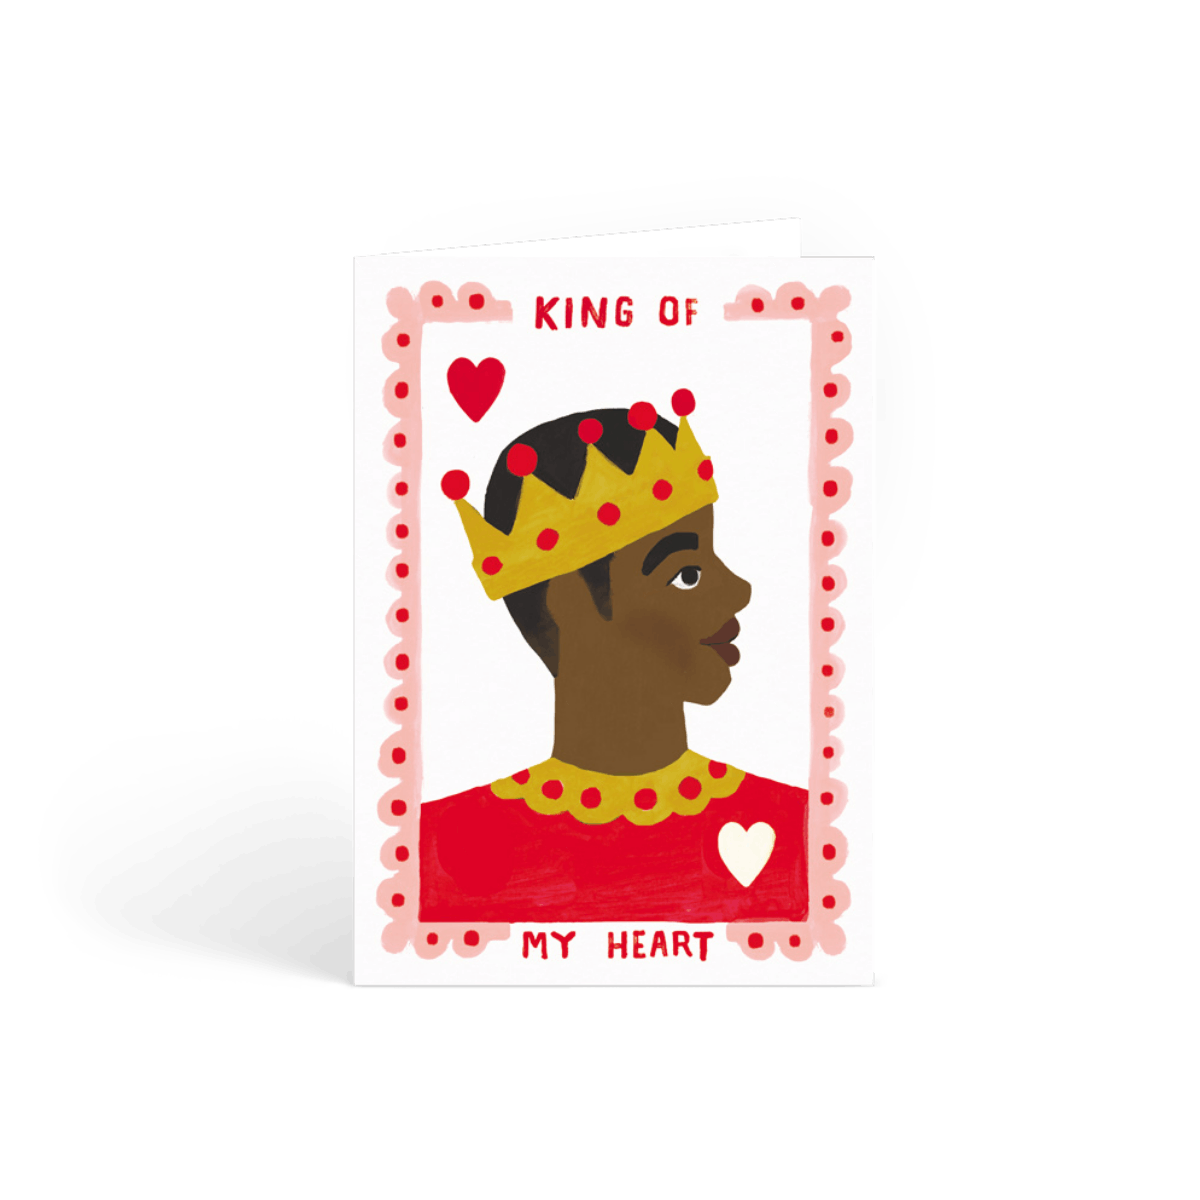 You're The King Of My Heart